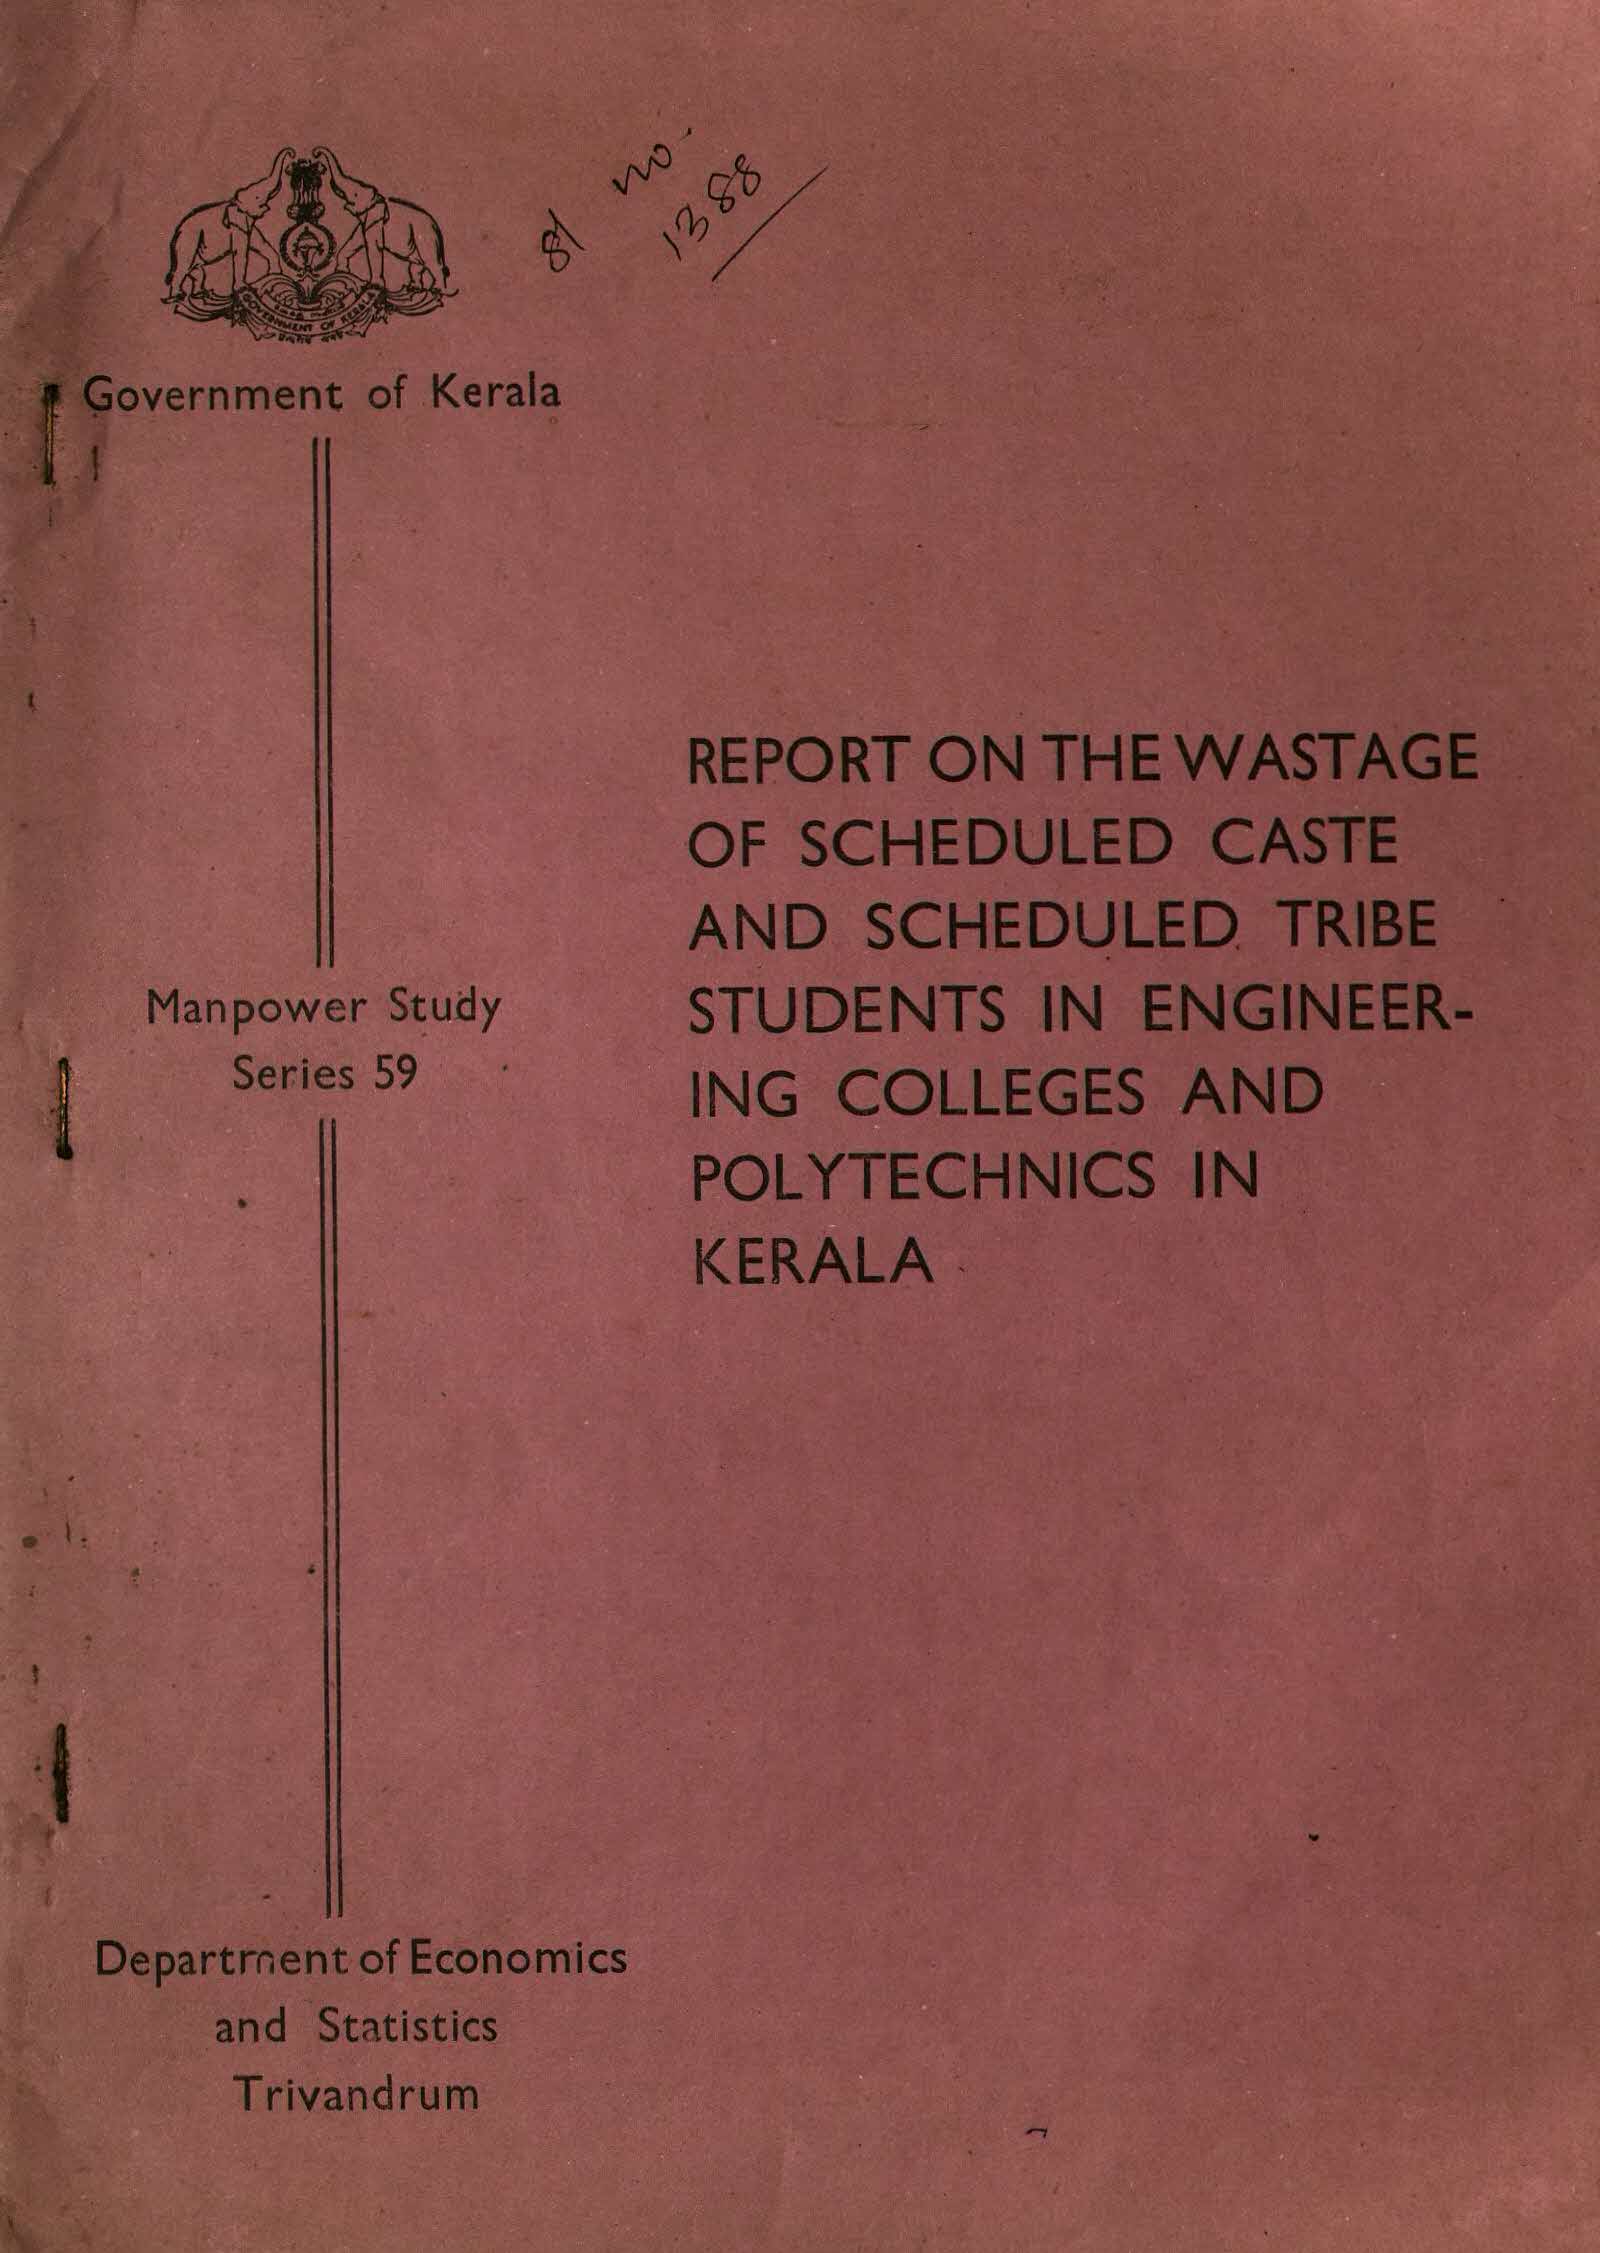 Report On The Wastage Of Scheduled Caste And Scheduled Tribe Students In Engineering Colleges And Polytechnic In Kerala